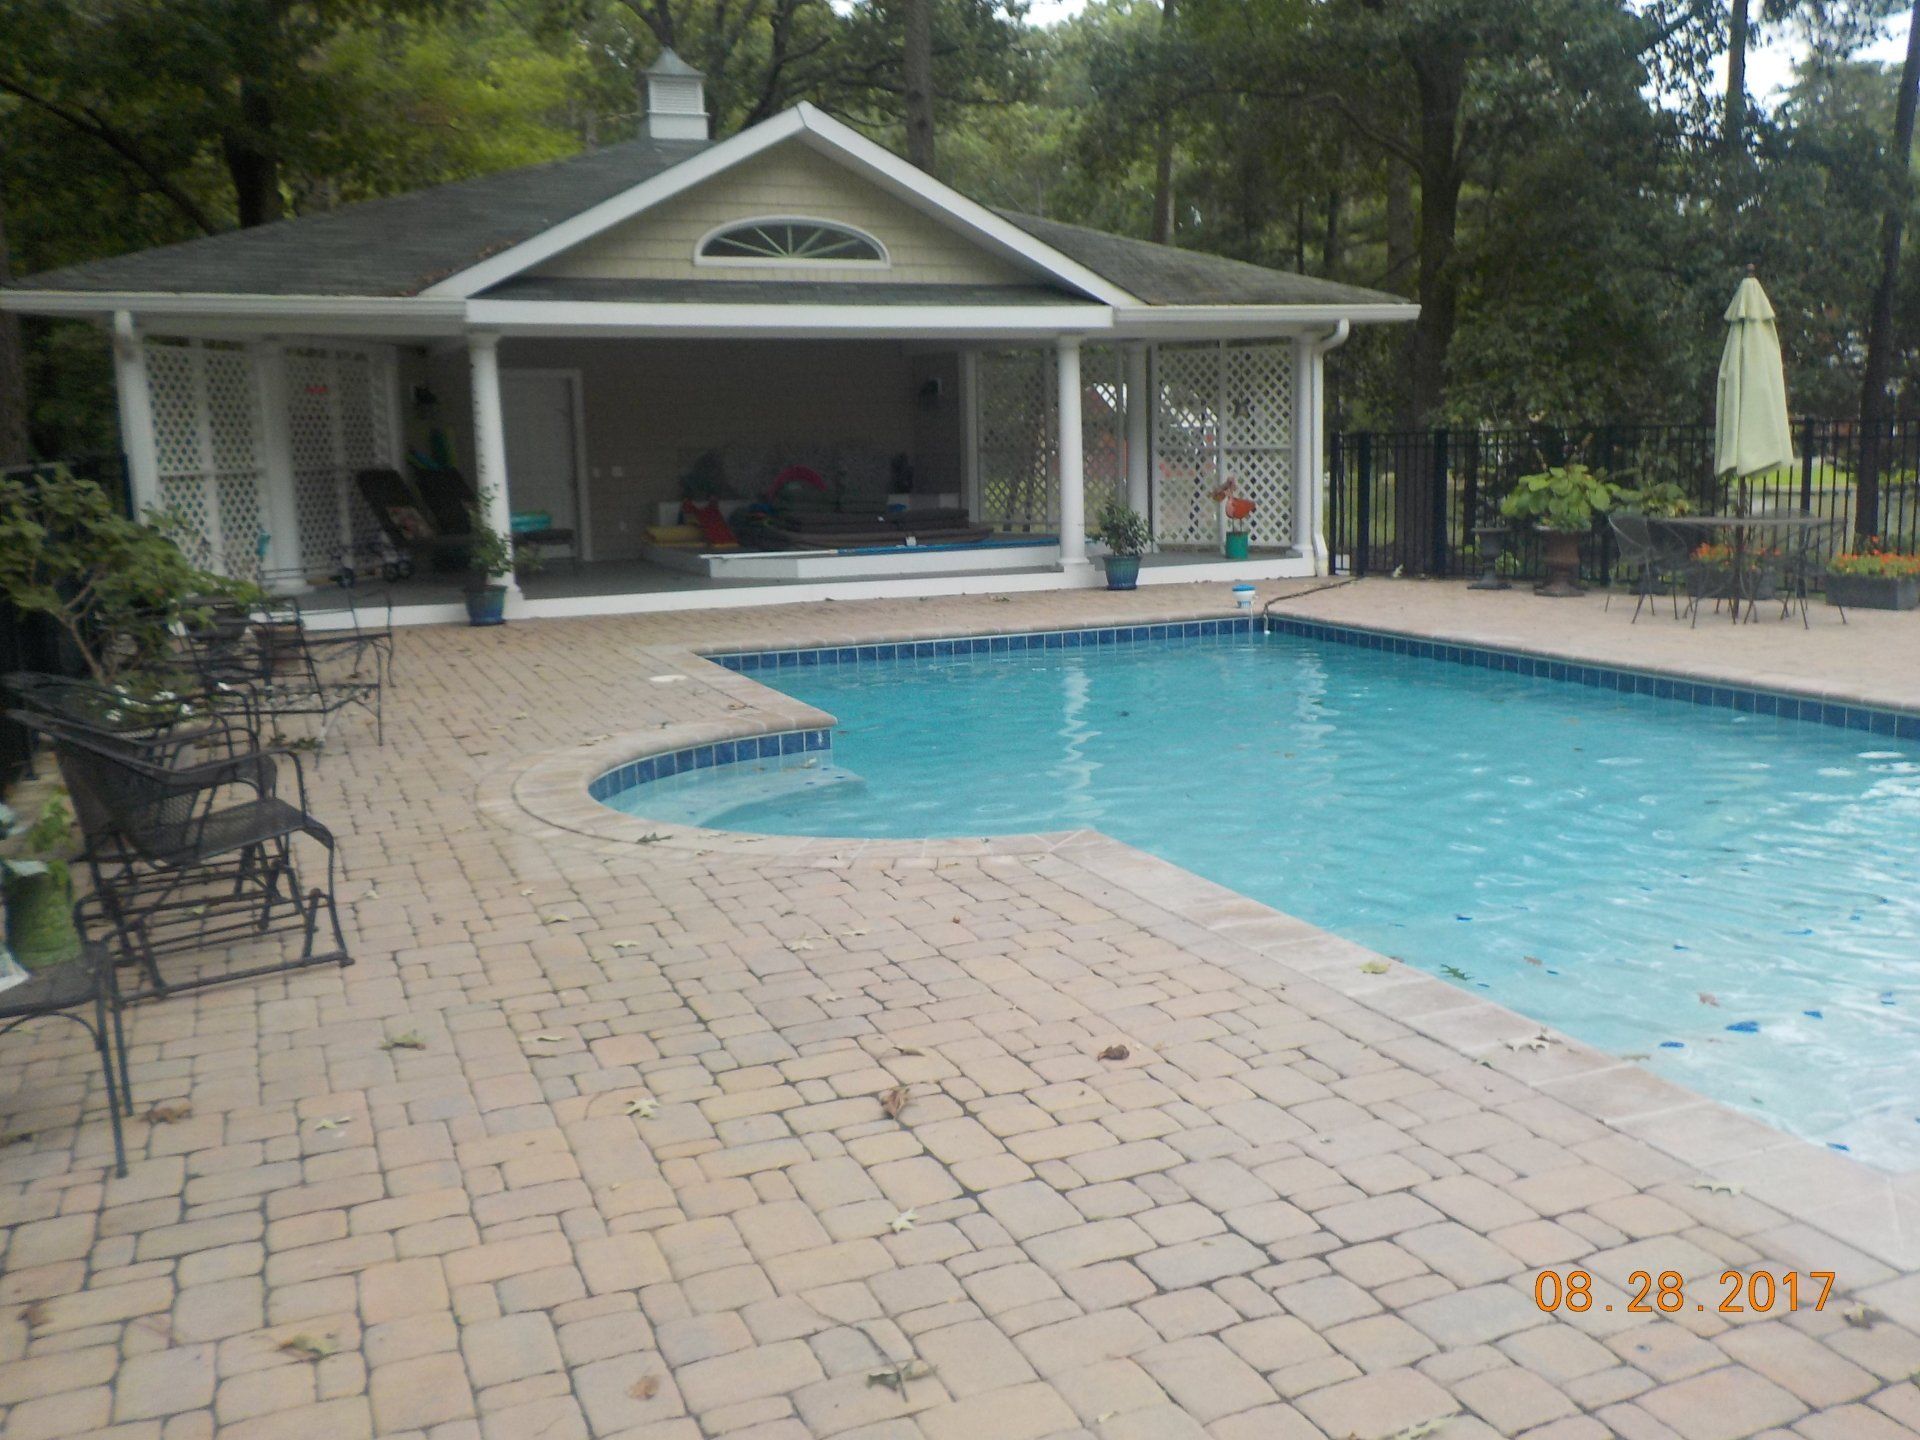 Commercial Landscaping — Outside Paver With Swimming Pool in Shacklefords, VA